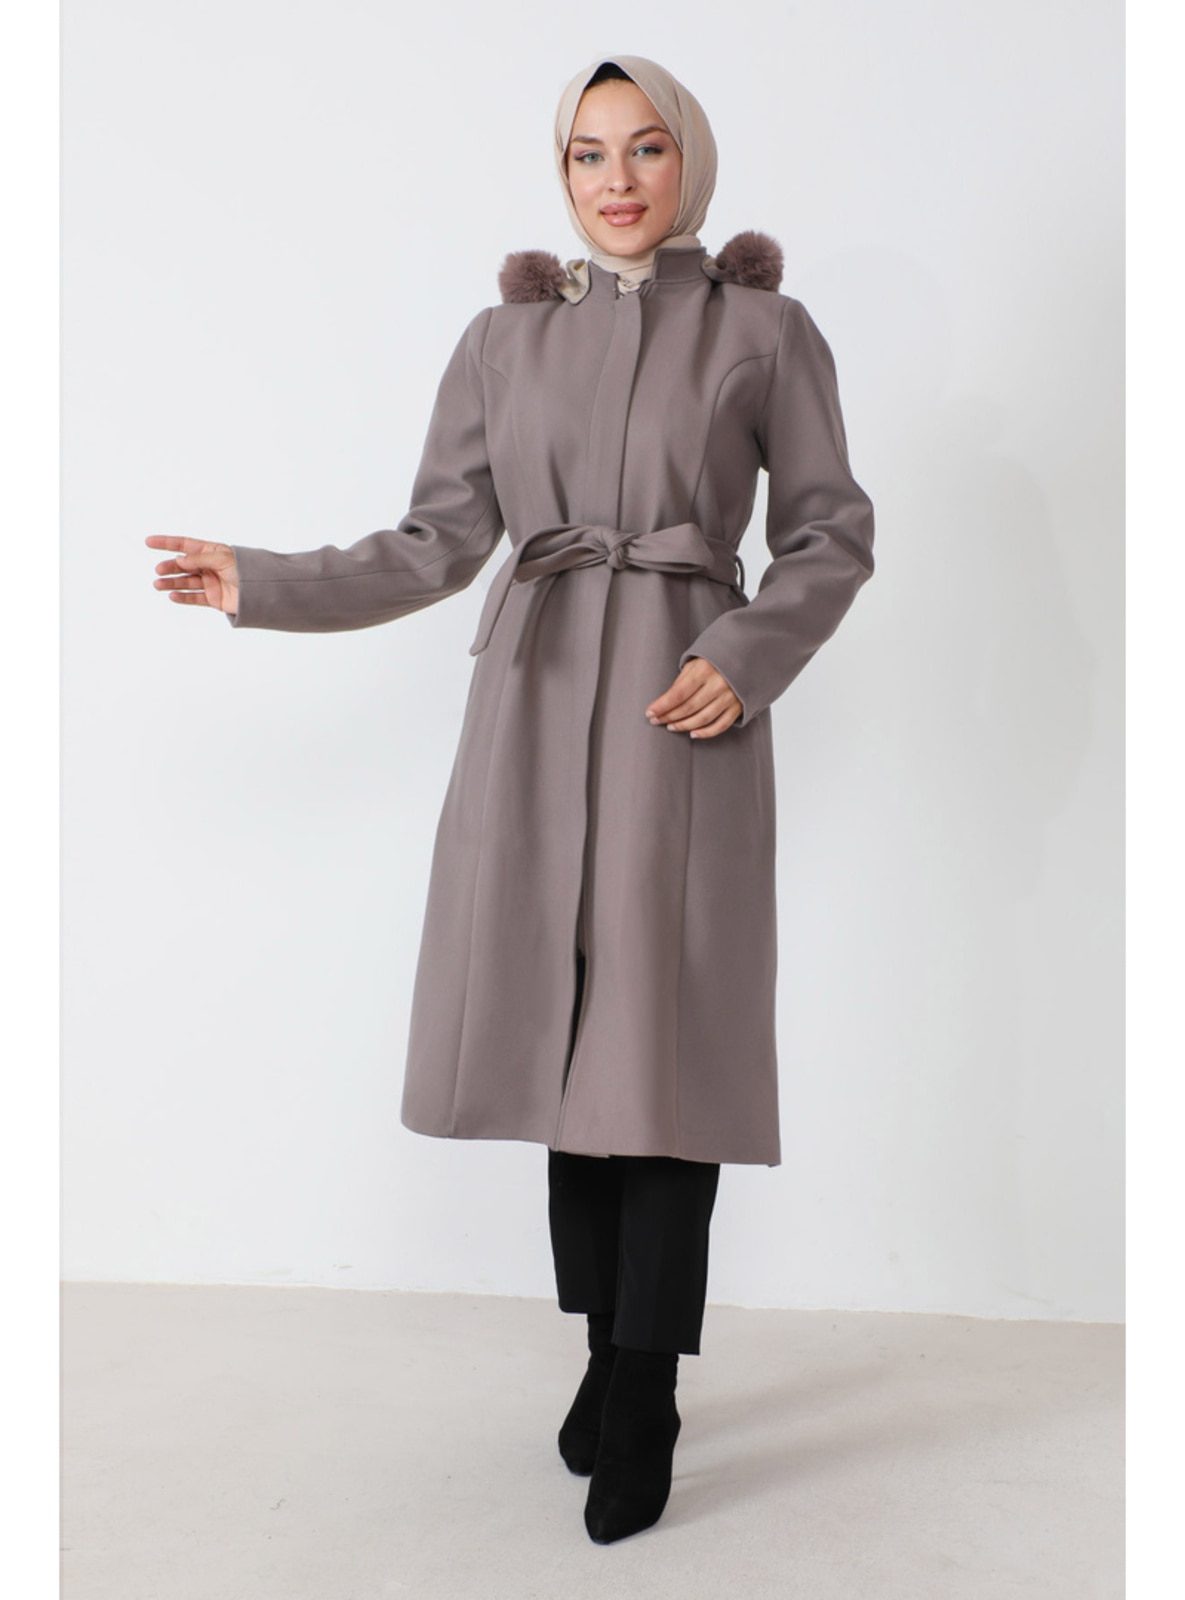 Mink - Fully Lined - Plus Size Coat